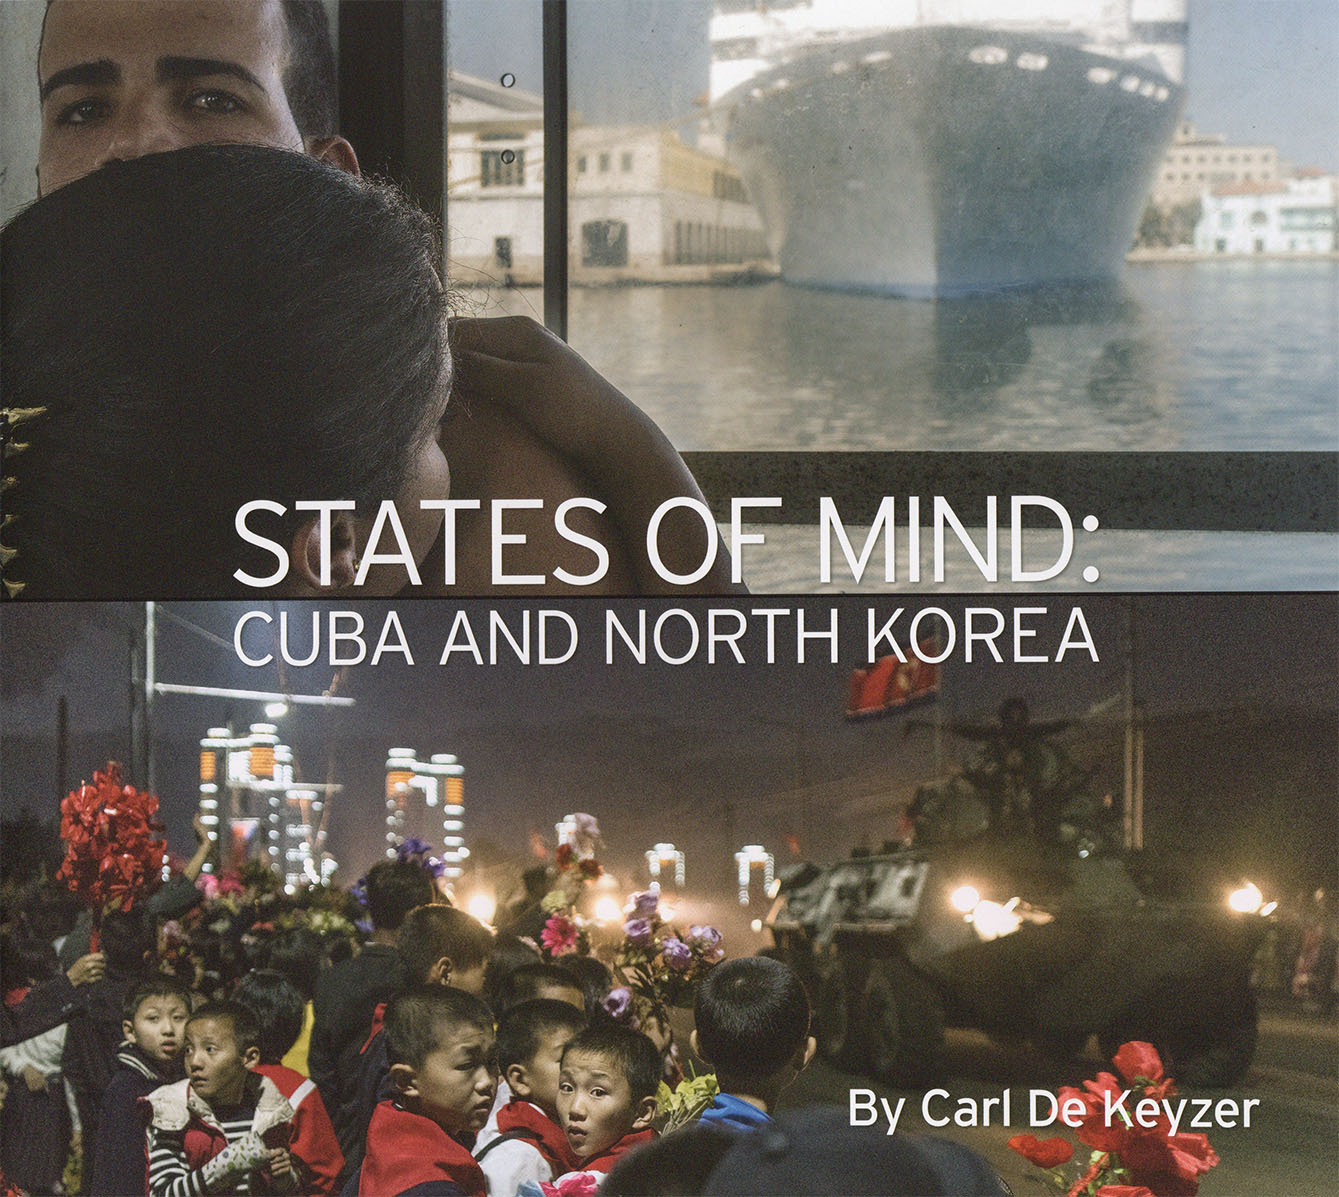 States of Mind (DPRK)